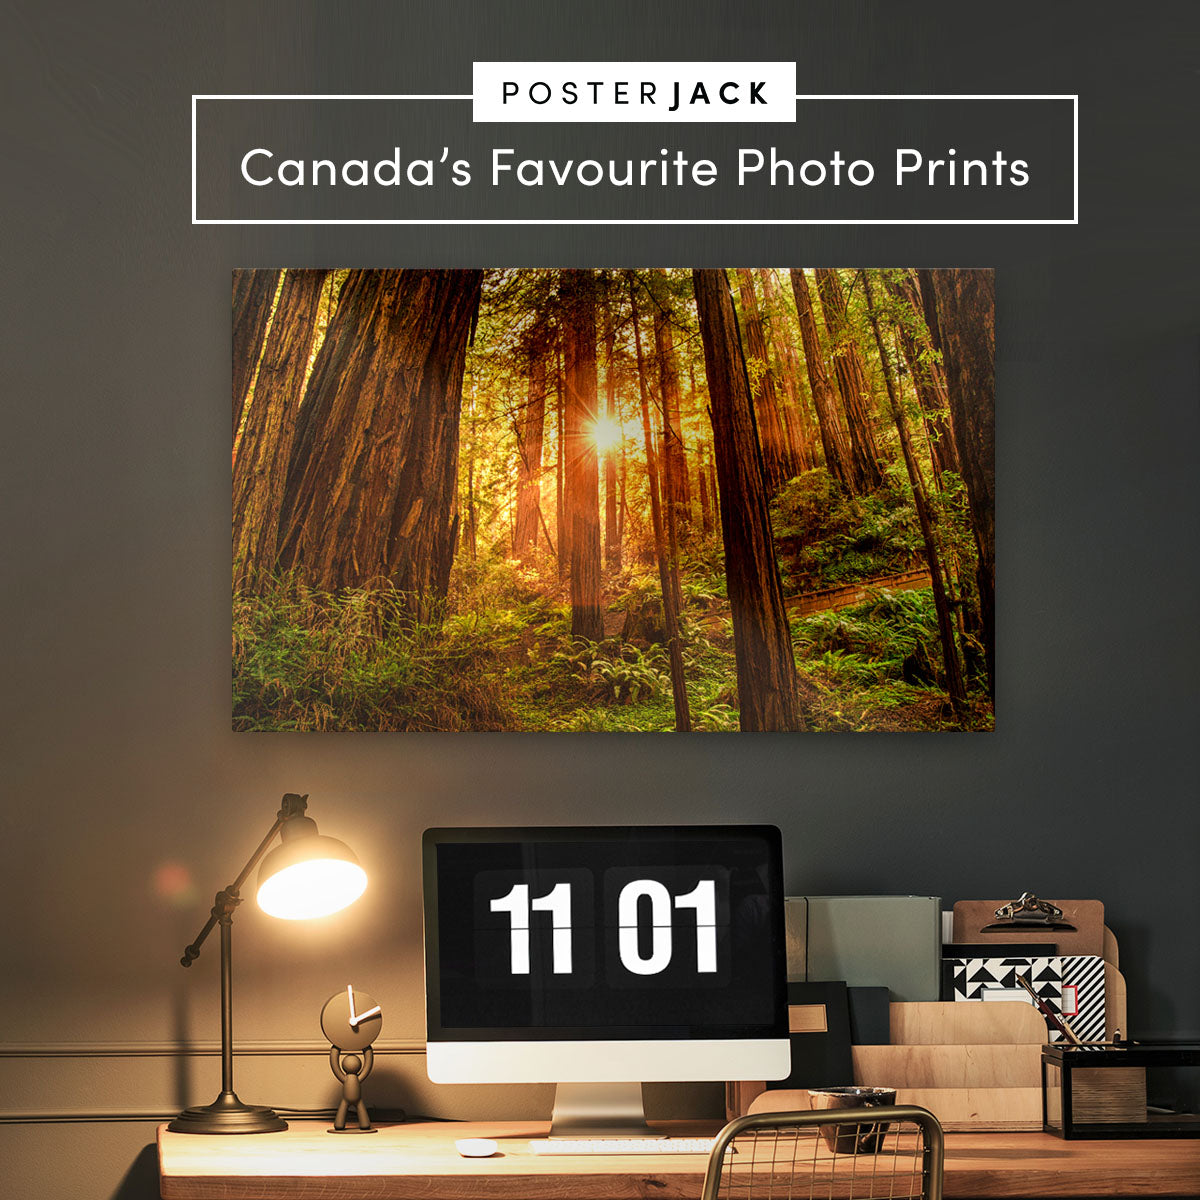 Posterjack Canadian Favourite Photo Printing square social media graphic